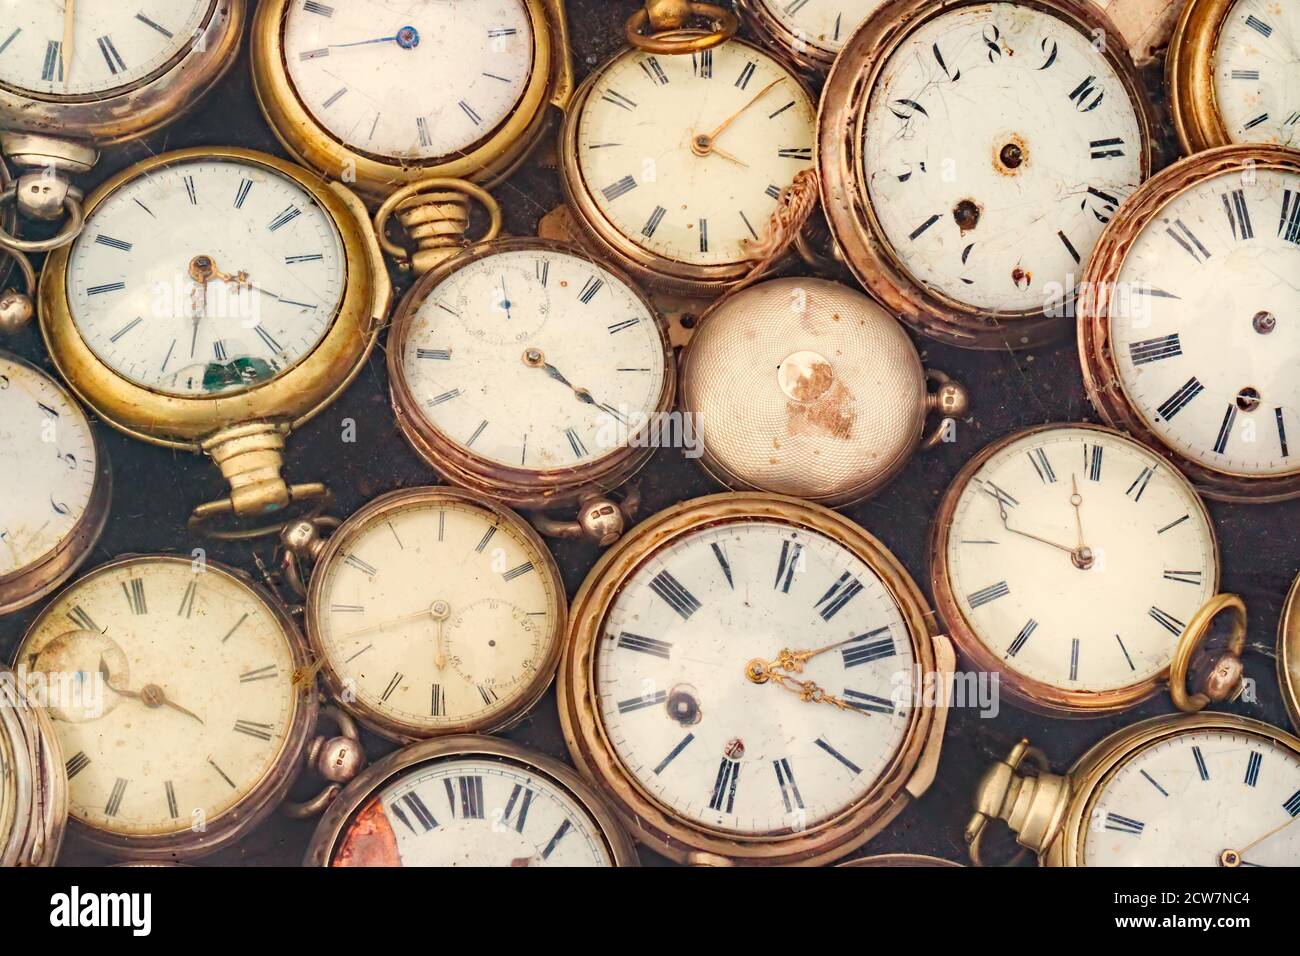 Retro styled image of old scratched and run down pocket watches Stock Photo